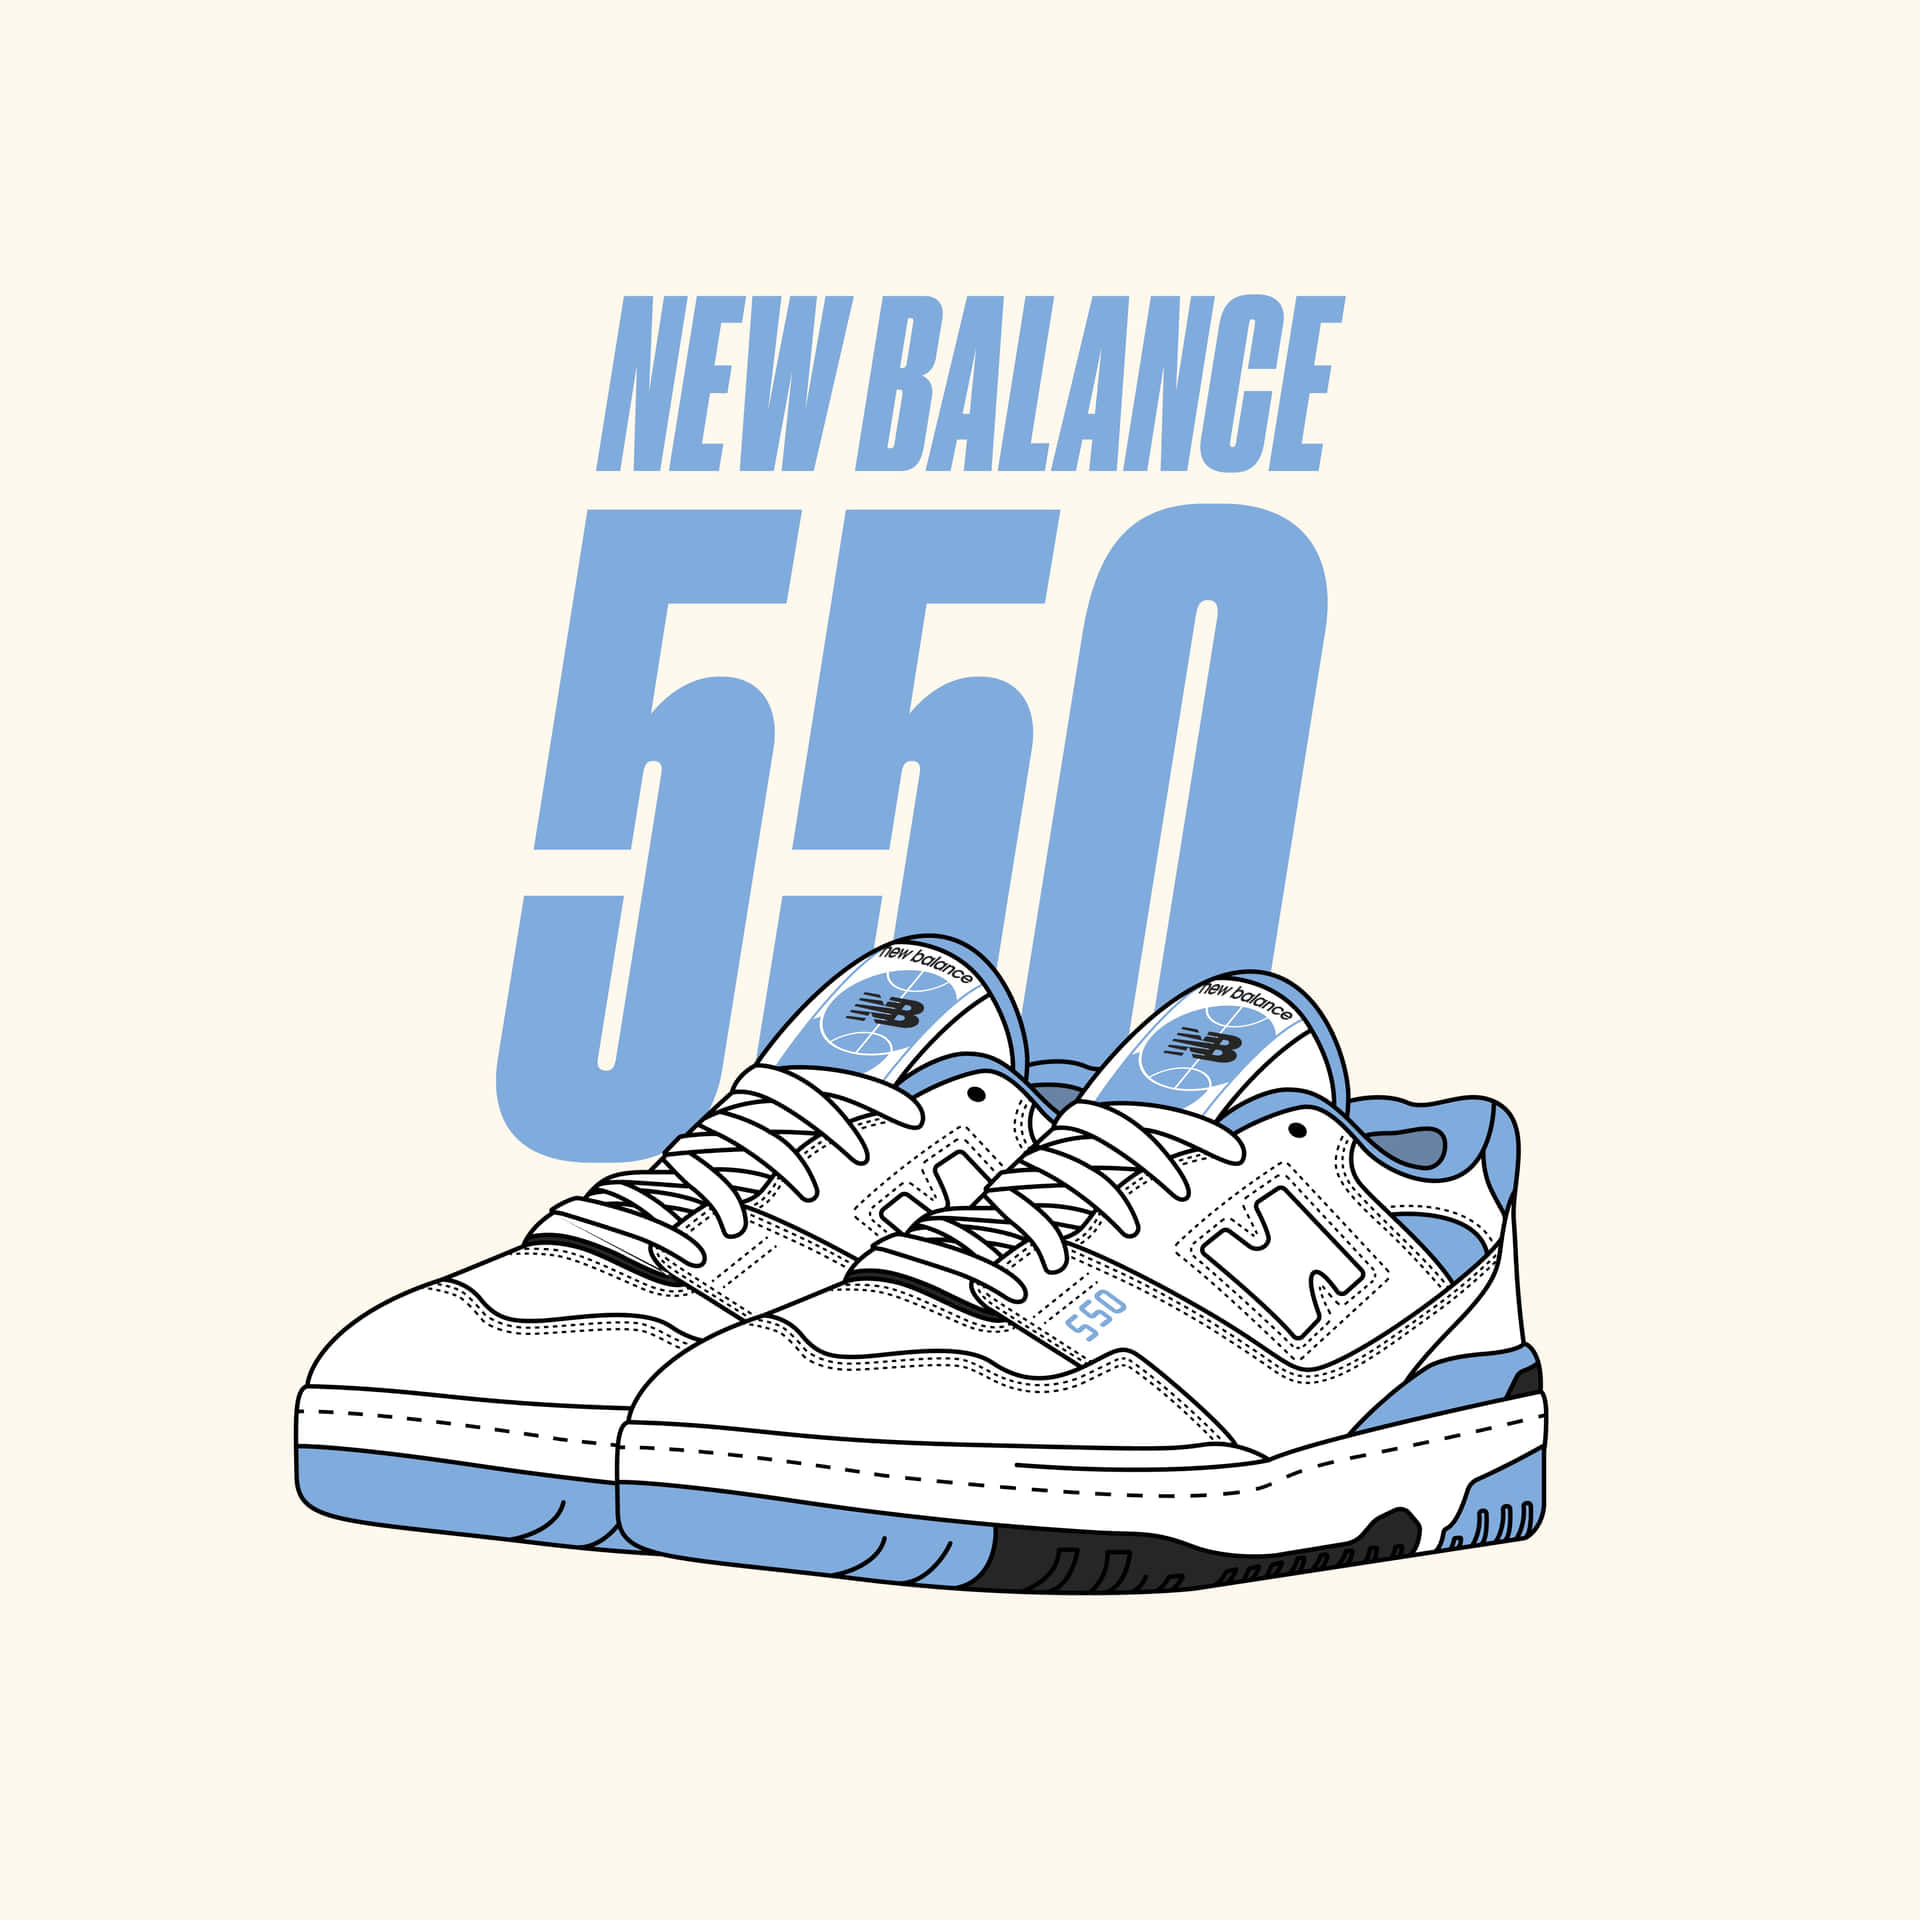 Keep pace with the style of New Balance